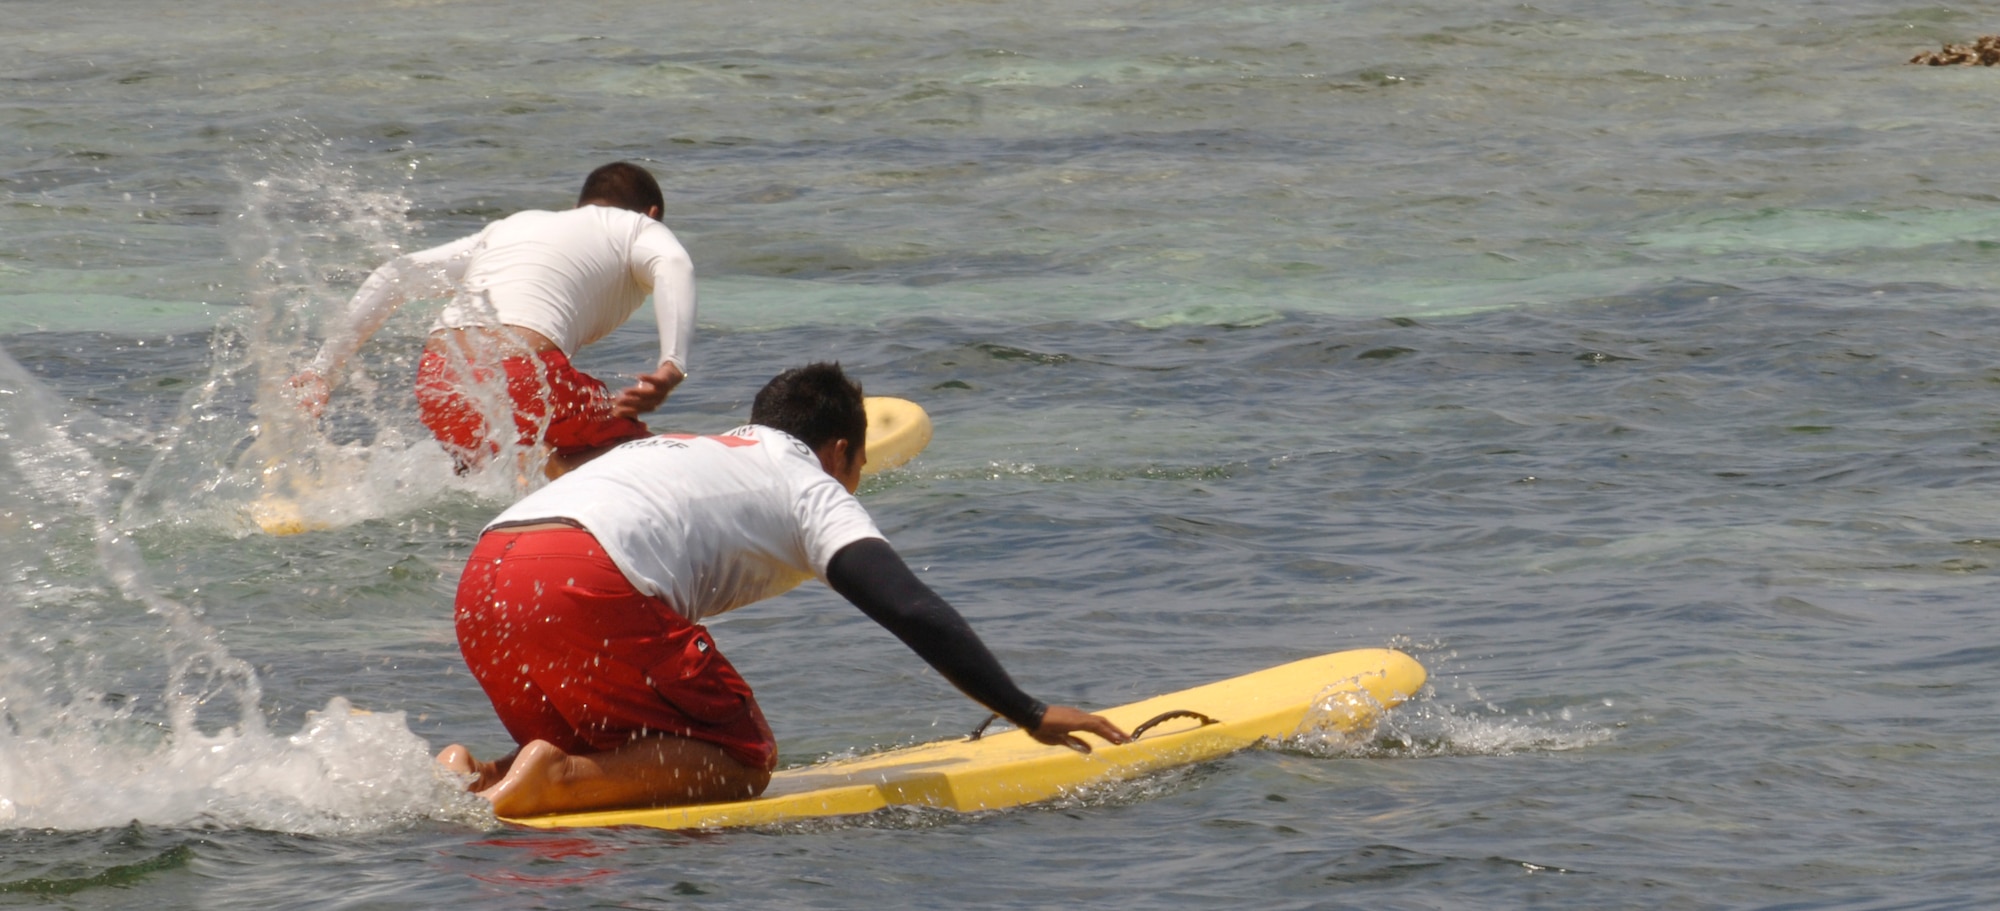 Andersen Air Force Base Lifeguards Ruben Cruz (left) and Christian Villanueva (right) swim out on rescue boards to perform a simulated water search and rescue during the SAREX May 8 at Tarague Beach. The exercise enhances the tactical inter-operability within the island of Guam for water rescue emergencies in realistic ocean environment. The SAREX also included members from Guam's police and fire departments, the Navy's Helicopter Sea Combat Squadron 25, Coast Guard, Jeff's Pirates Cove Rescue Team. (U.S. Air Force photo by Airman 1st Class Nichelle Griffiths)